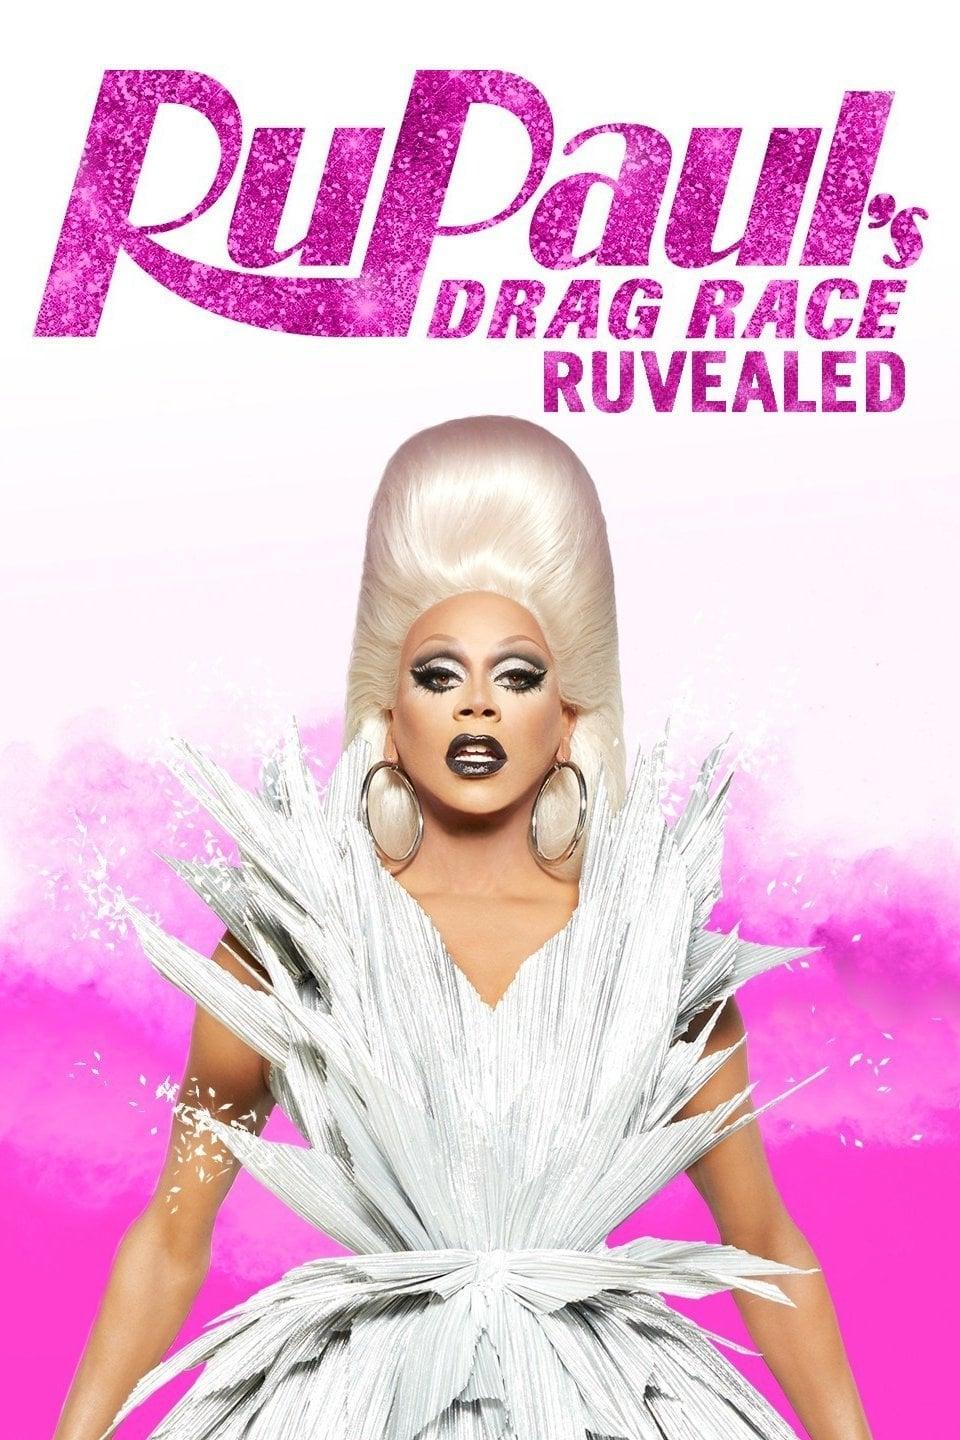 RuPaul's Drag Race: RuVealed poster